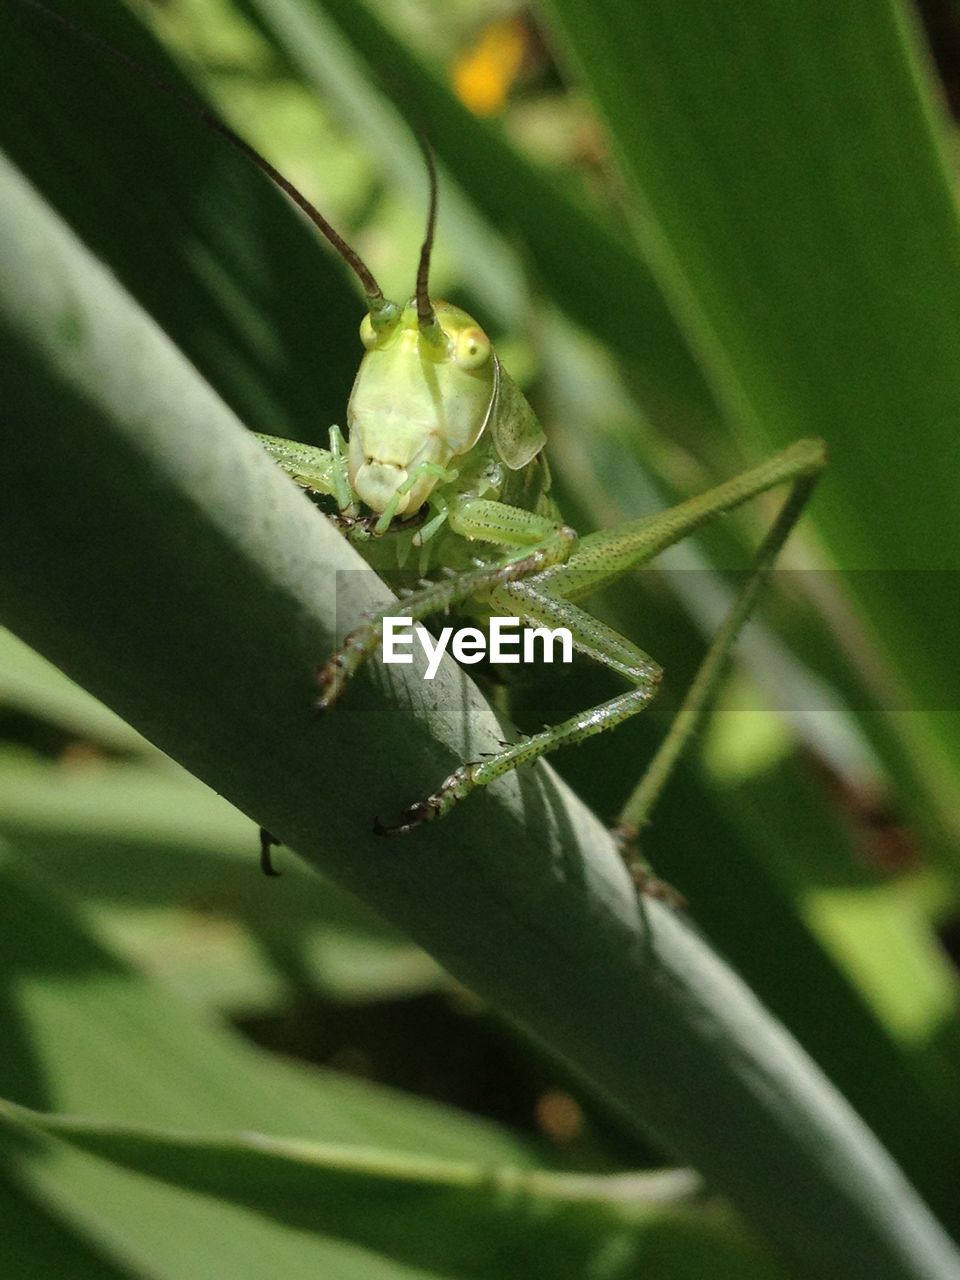 Low angle view of grasshopper on plant stem